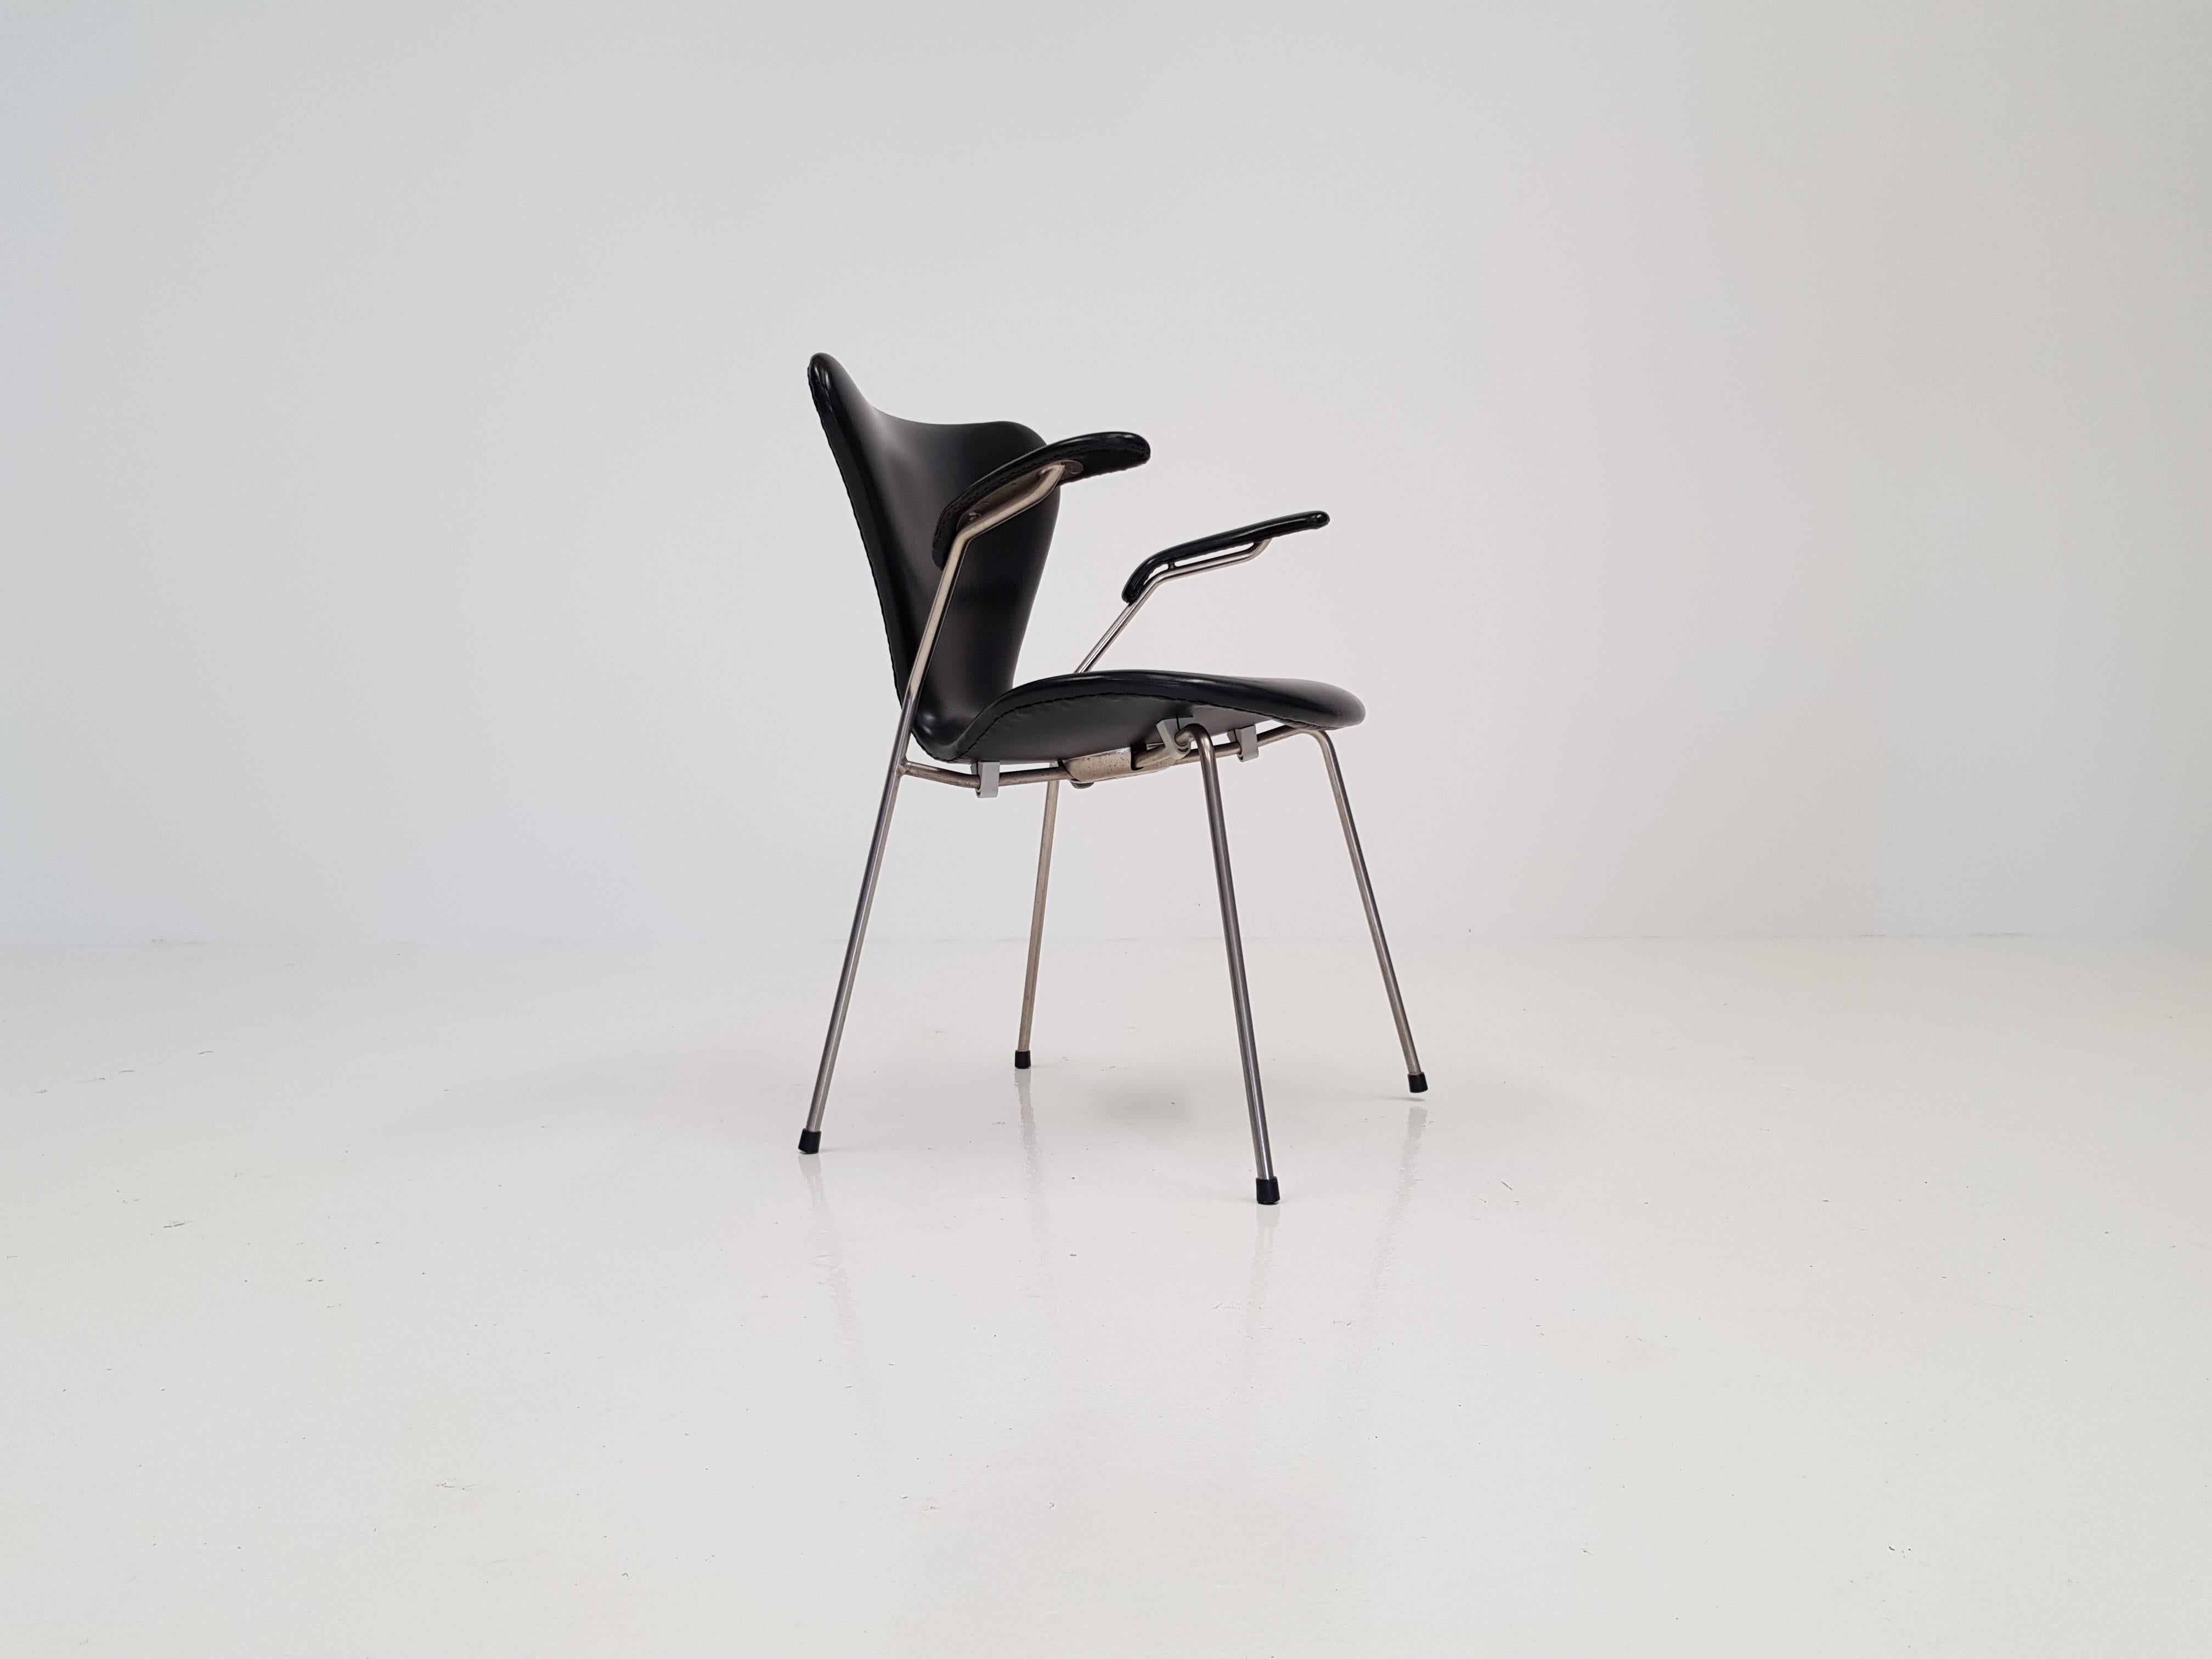 Model 3207 Series 7 Armchair in Faux Leather by Arne Jacobsen for Fritz Hansen, produced in 1967

Arne Jacobsen 'series 7' model 3207 armchair in faux leather produced by Fritz Hansen in 1967. Great ergonomic design and one of the most iconic and